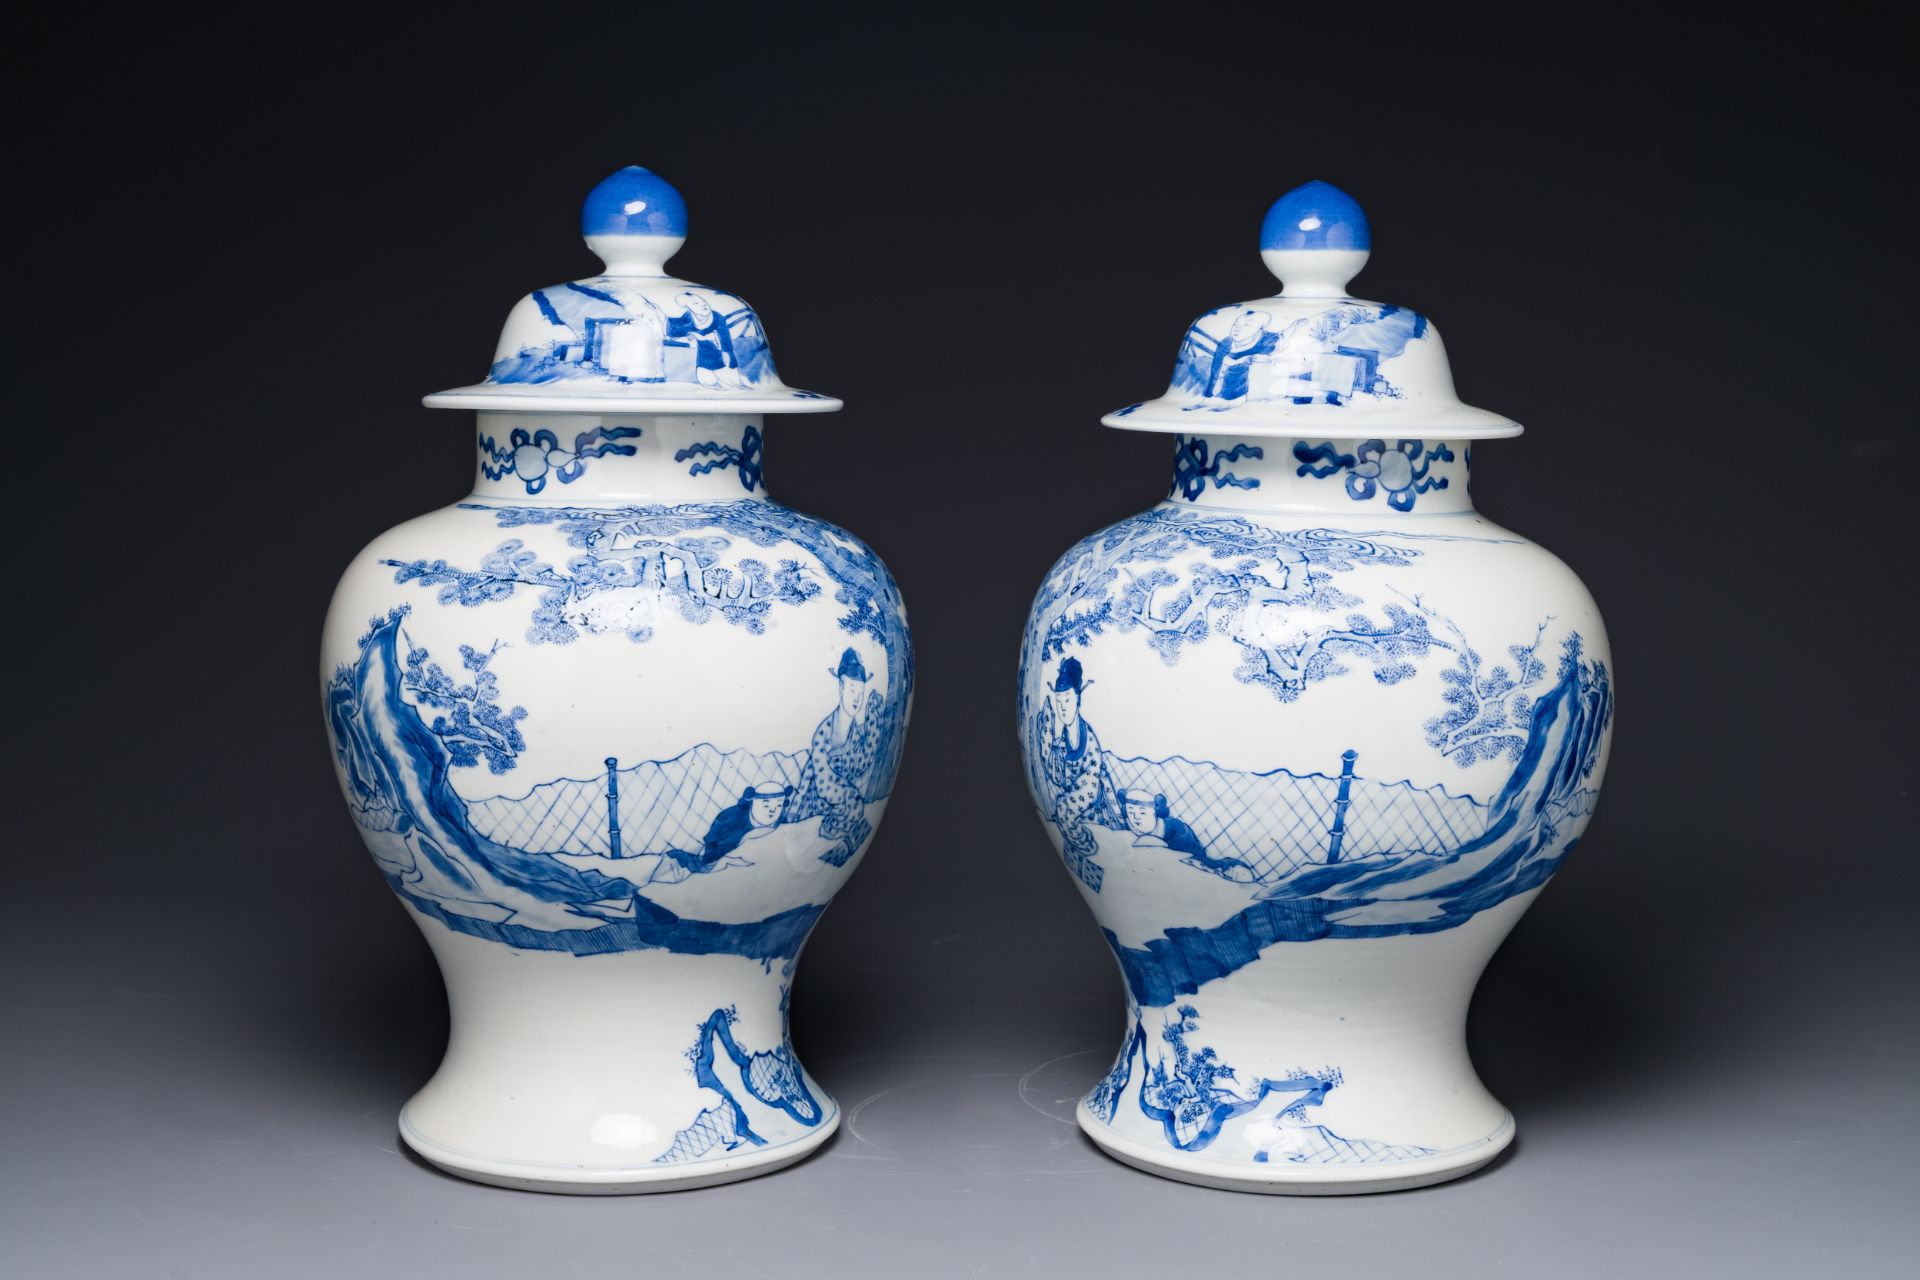 A pair of Chinese blue and white covered vases with figural design, 19th C. - Image 2 of 5